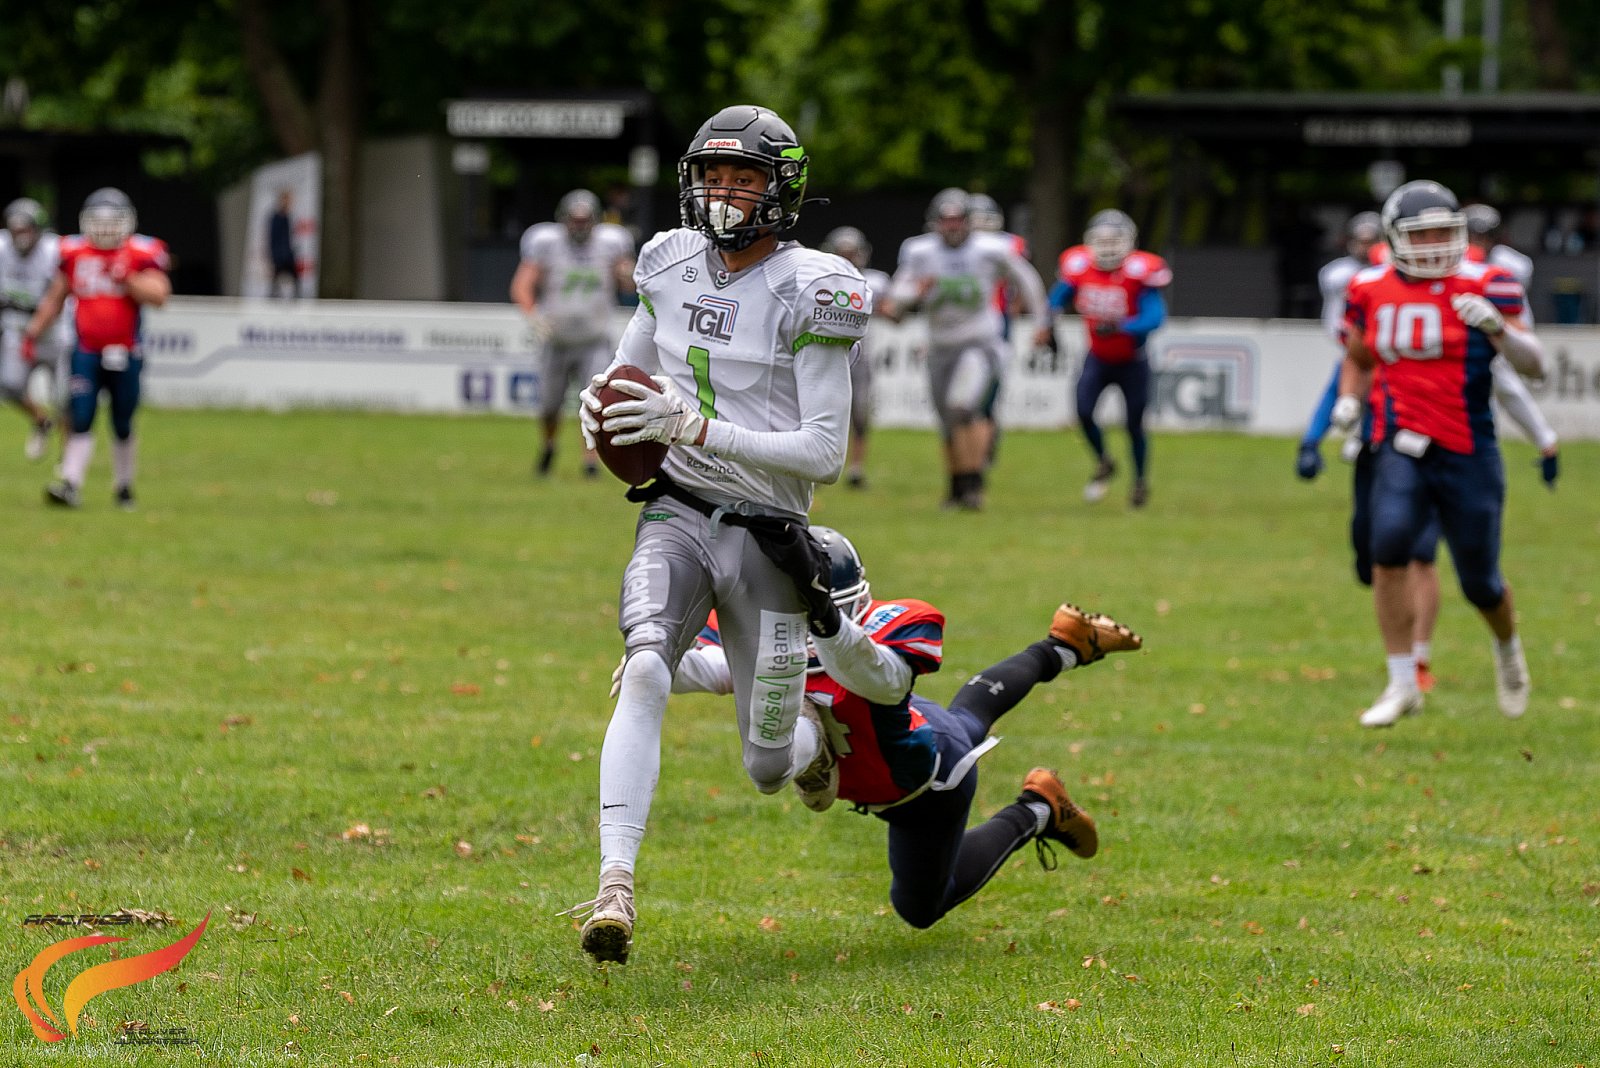 Lippstadt Eagles vs. Recklinghausen Chargers